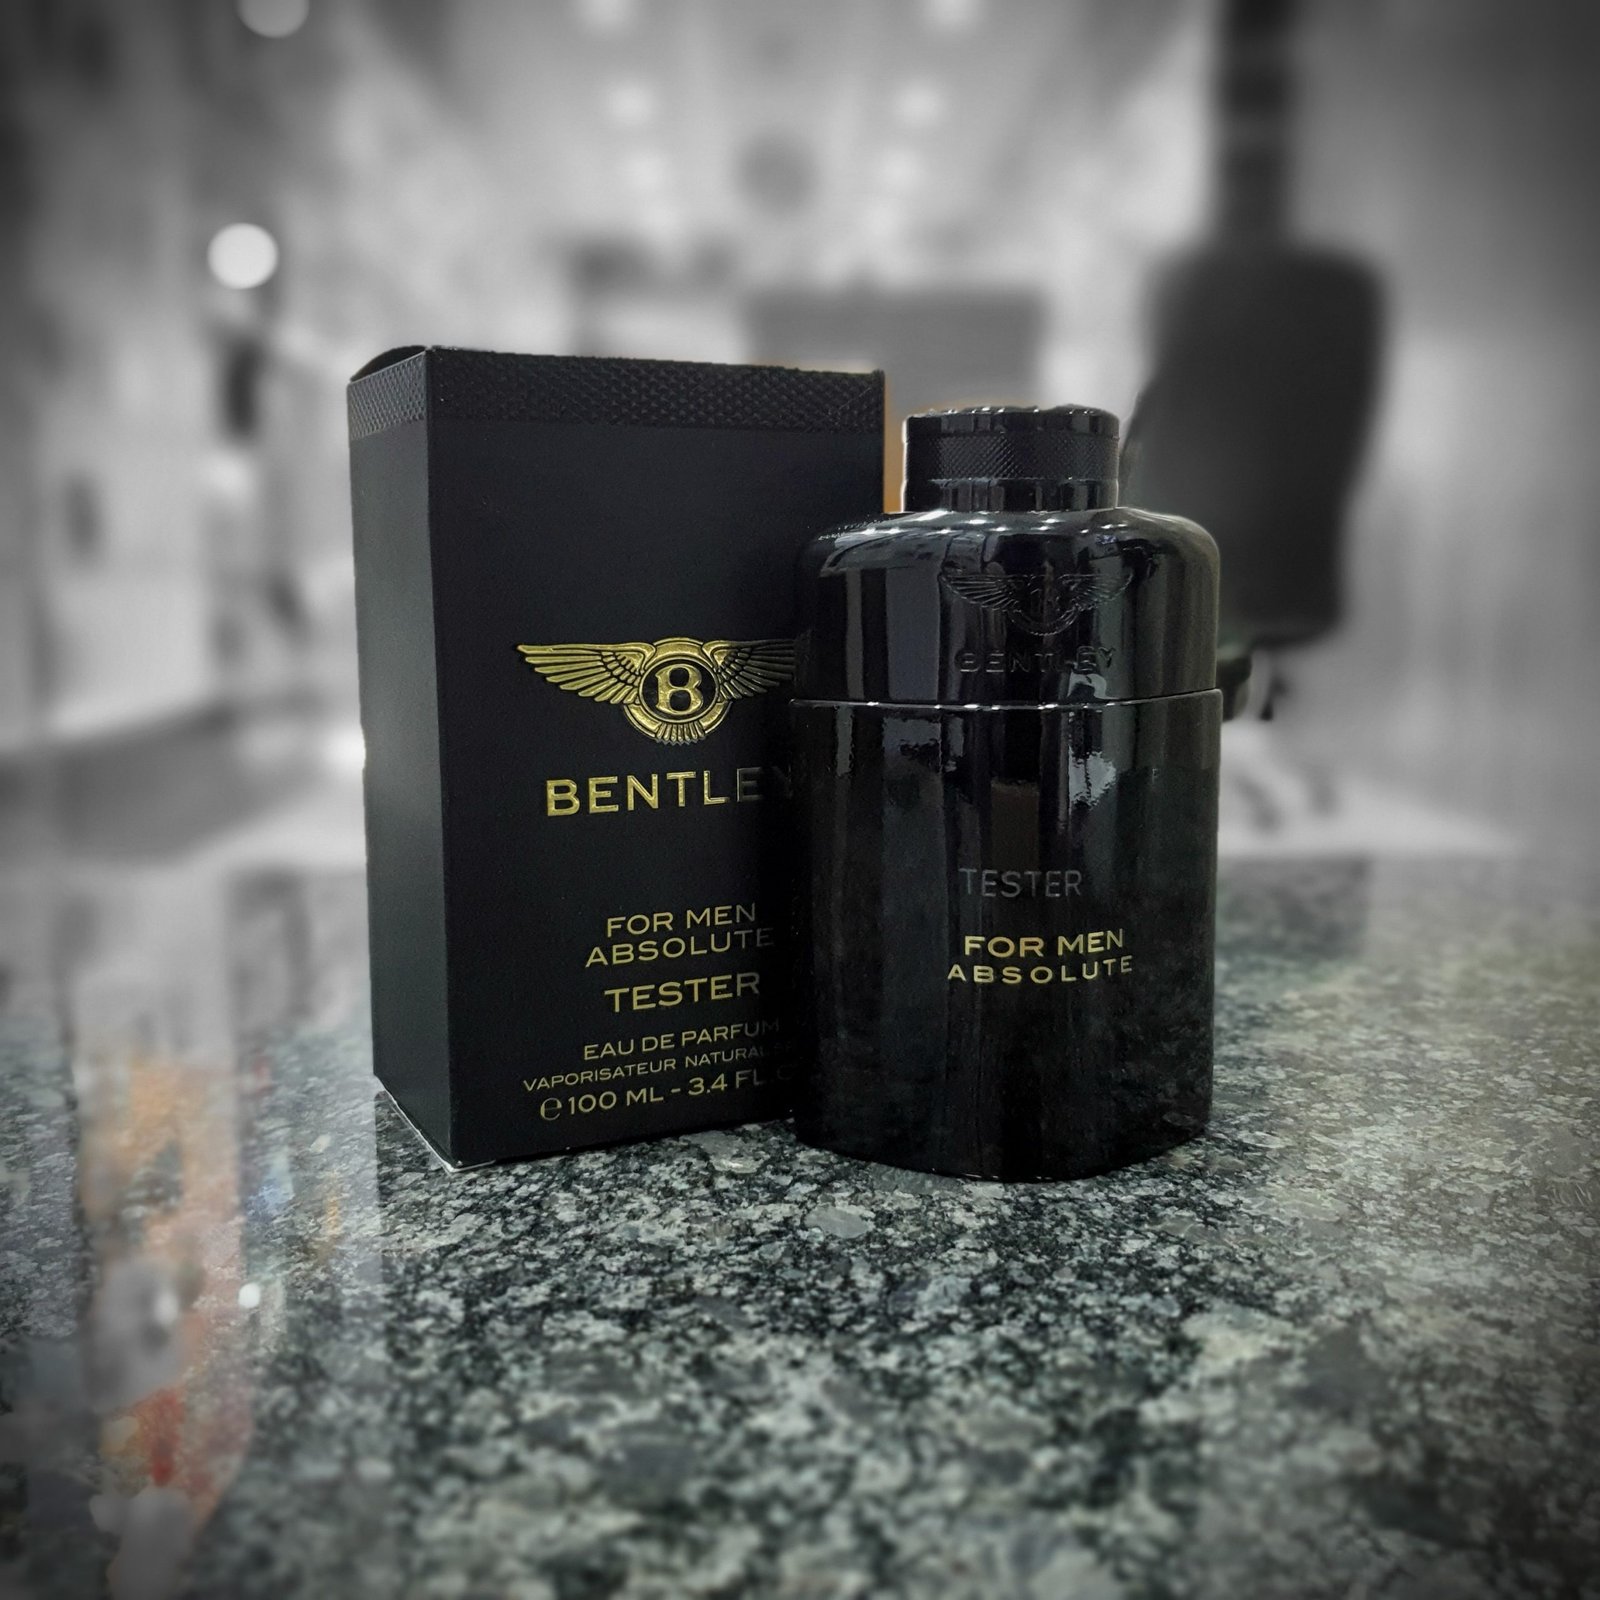 Bentley Absolute Man EDP 100ml Tester – The House Of Scents